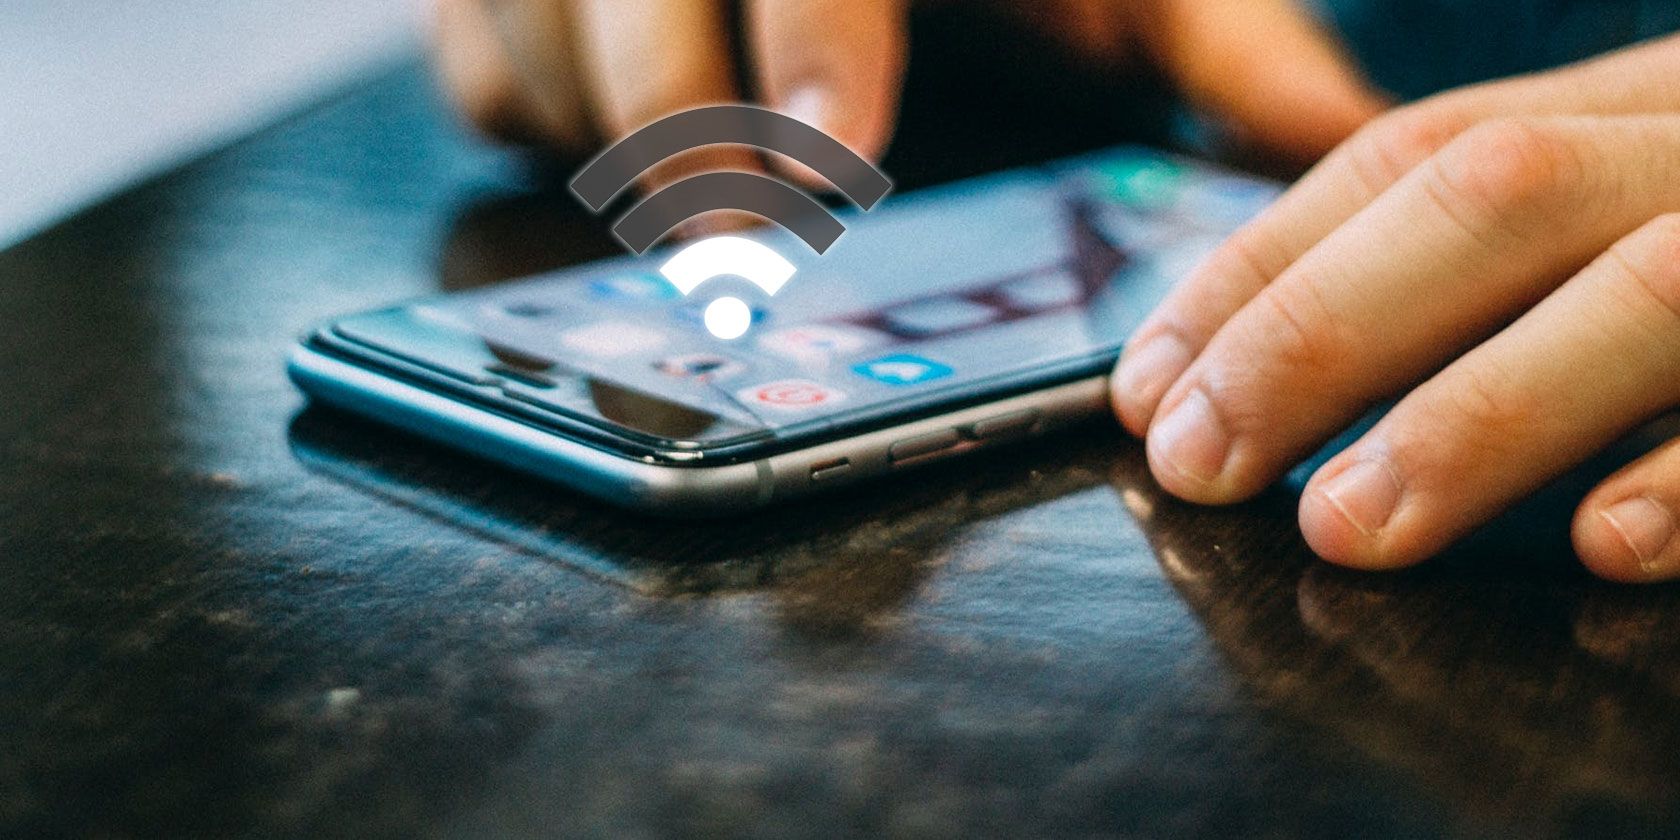 Why Wi-Fi Internet Is Slow on Your Phone